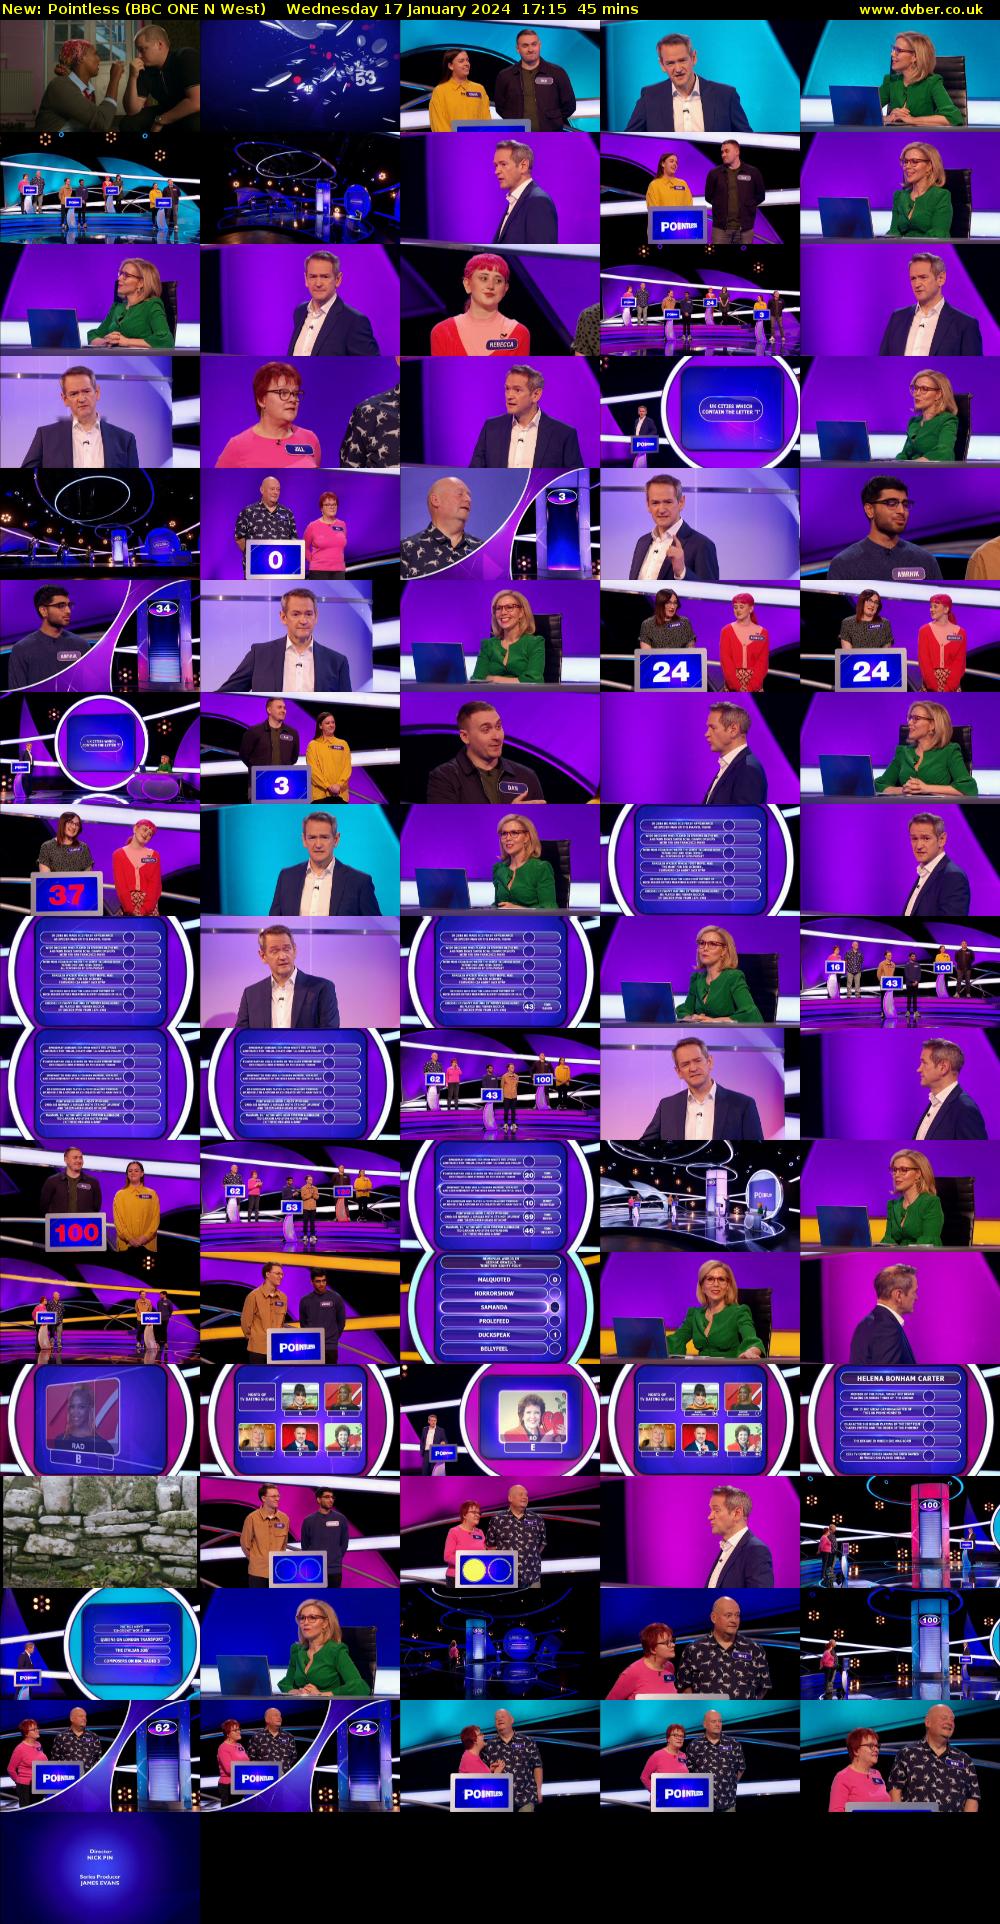 Pointless (BBC ONE N West) Wednesday 17 January 2024 17:15 - 18:00